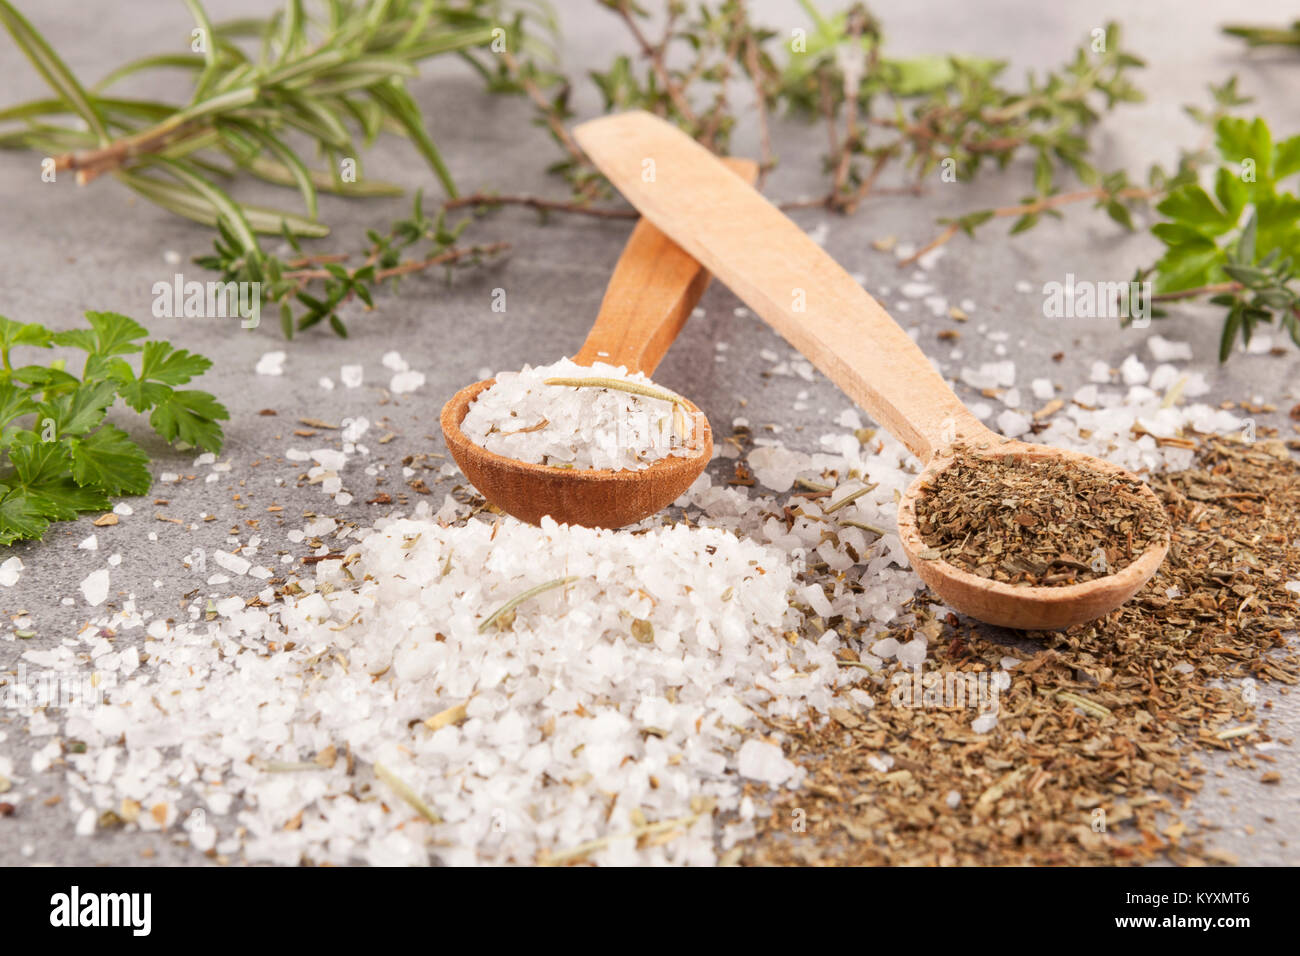 Sea salt scented provance herb on grey background. Healthy eating. Stock Photo